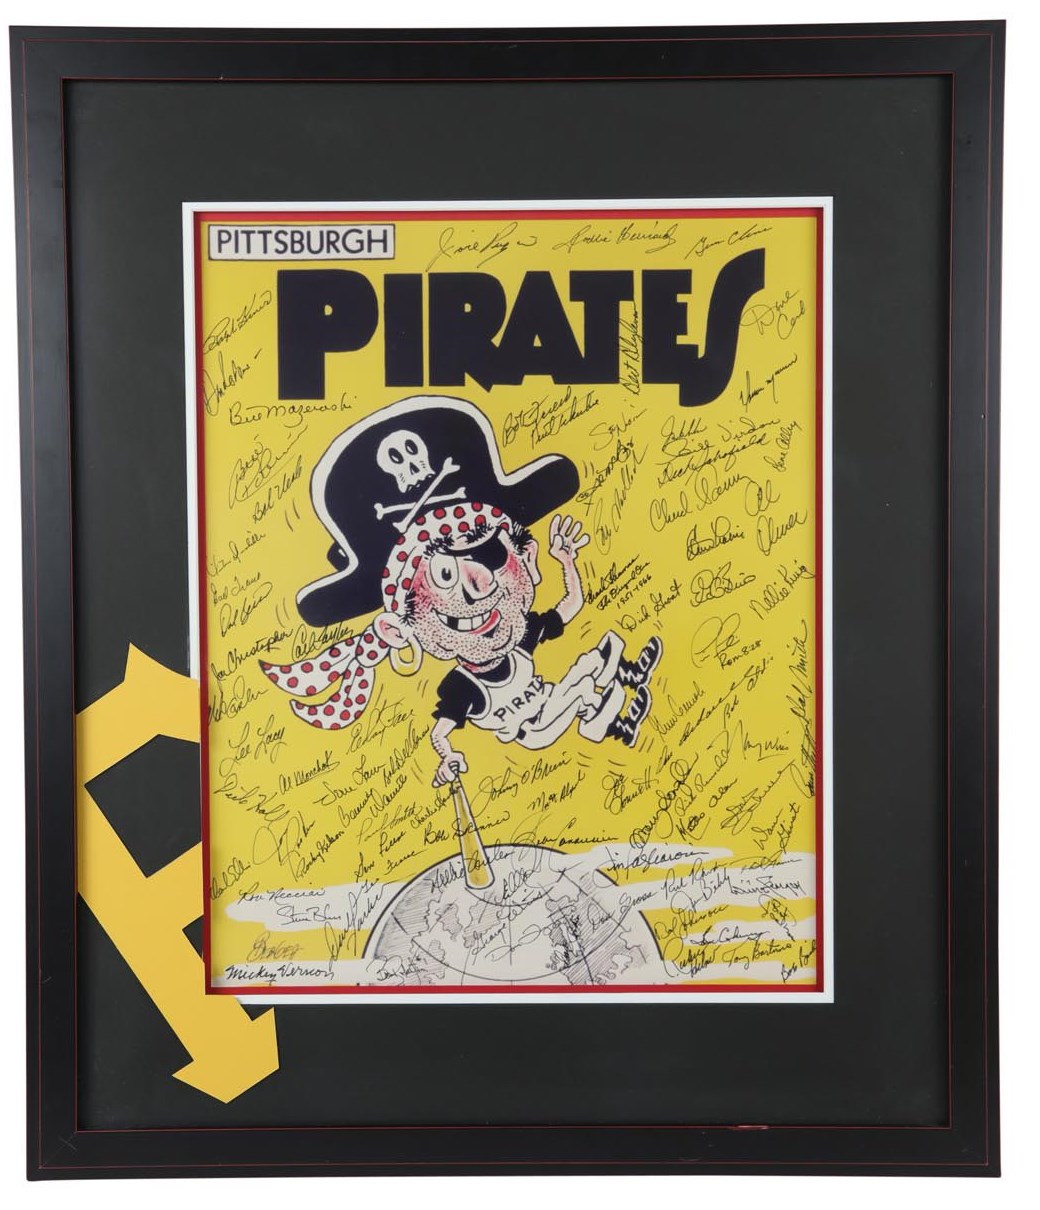 Baseball Autographs - Pittsburgh Pirates All-Time Greats Signed Print (80+ Signatures)